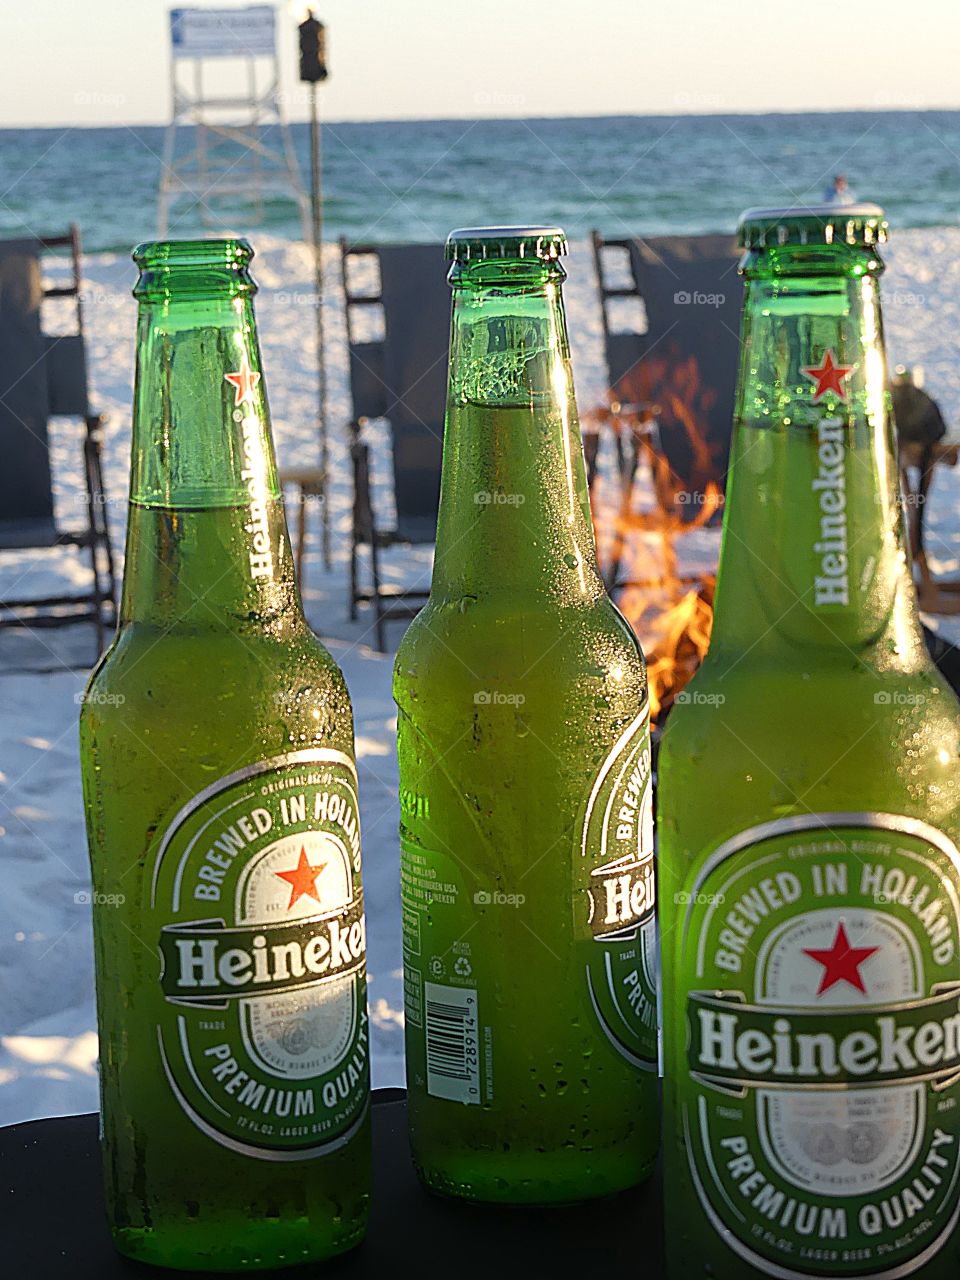 What more can you ask for then to be with friends on a white sandy beach with an open pit fire and drinking chilled Heineken Beer